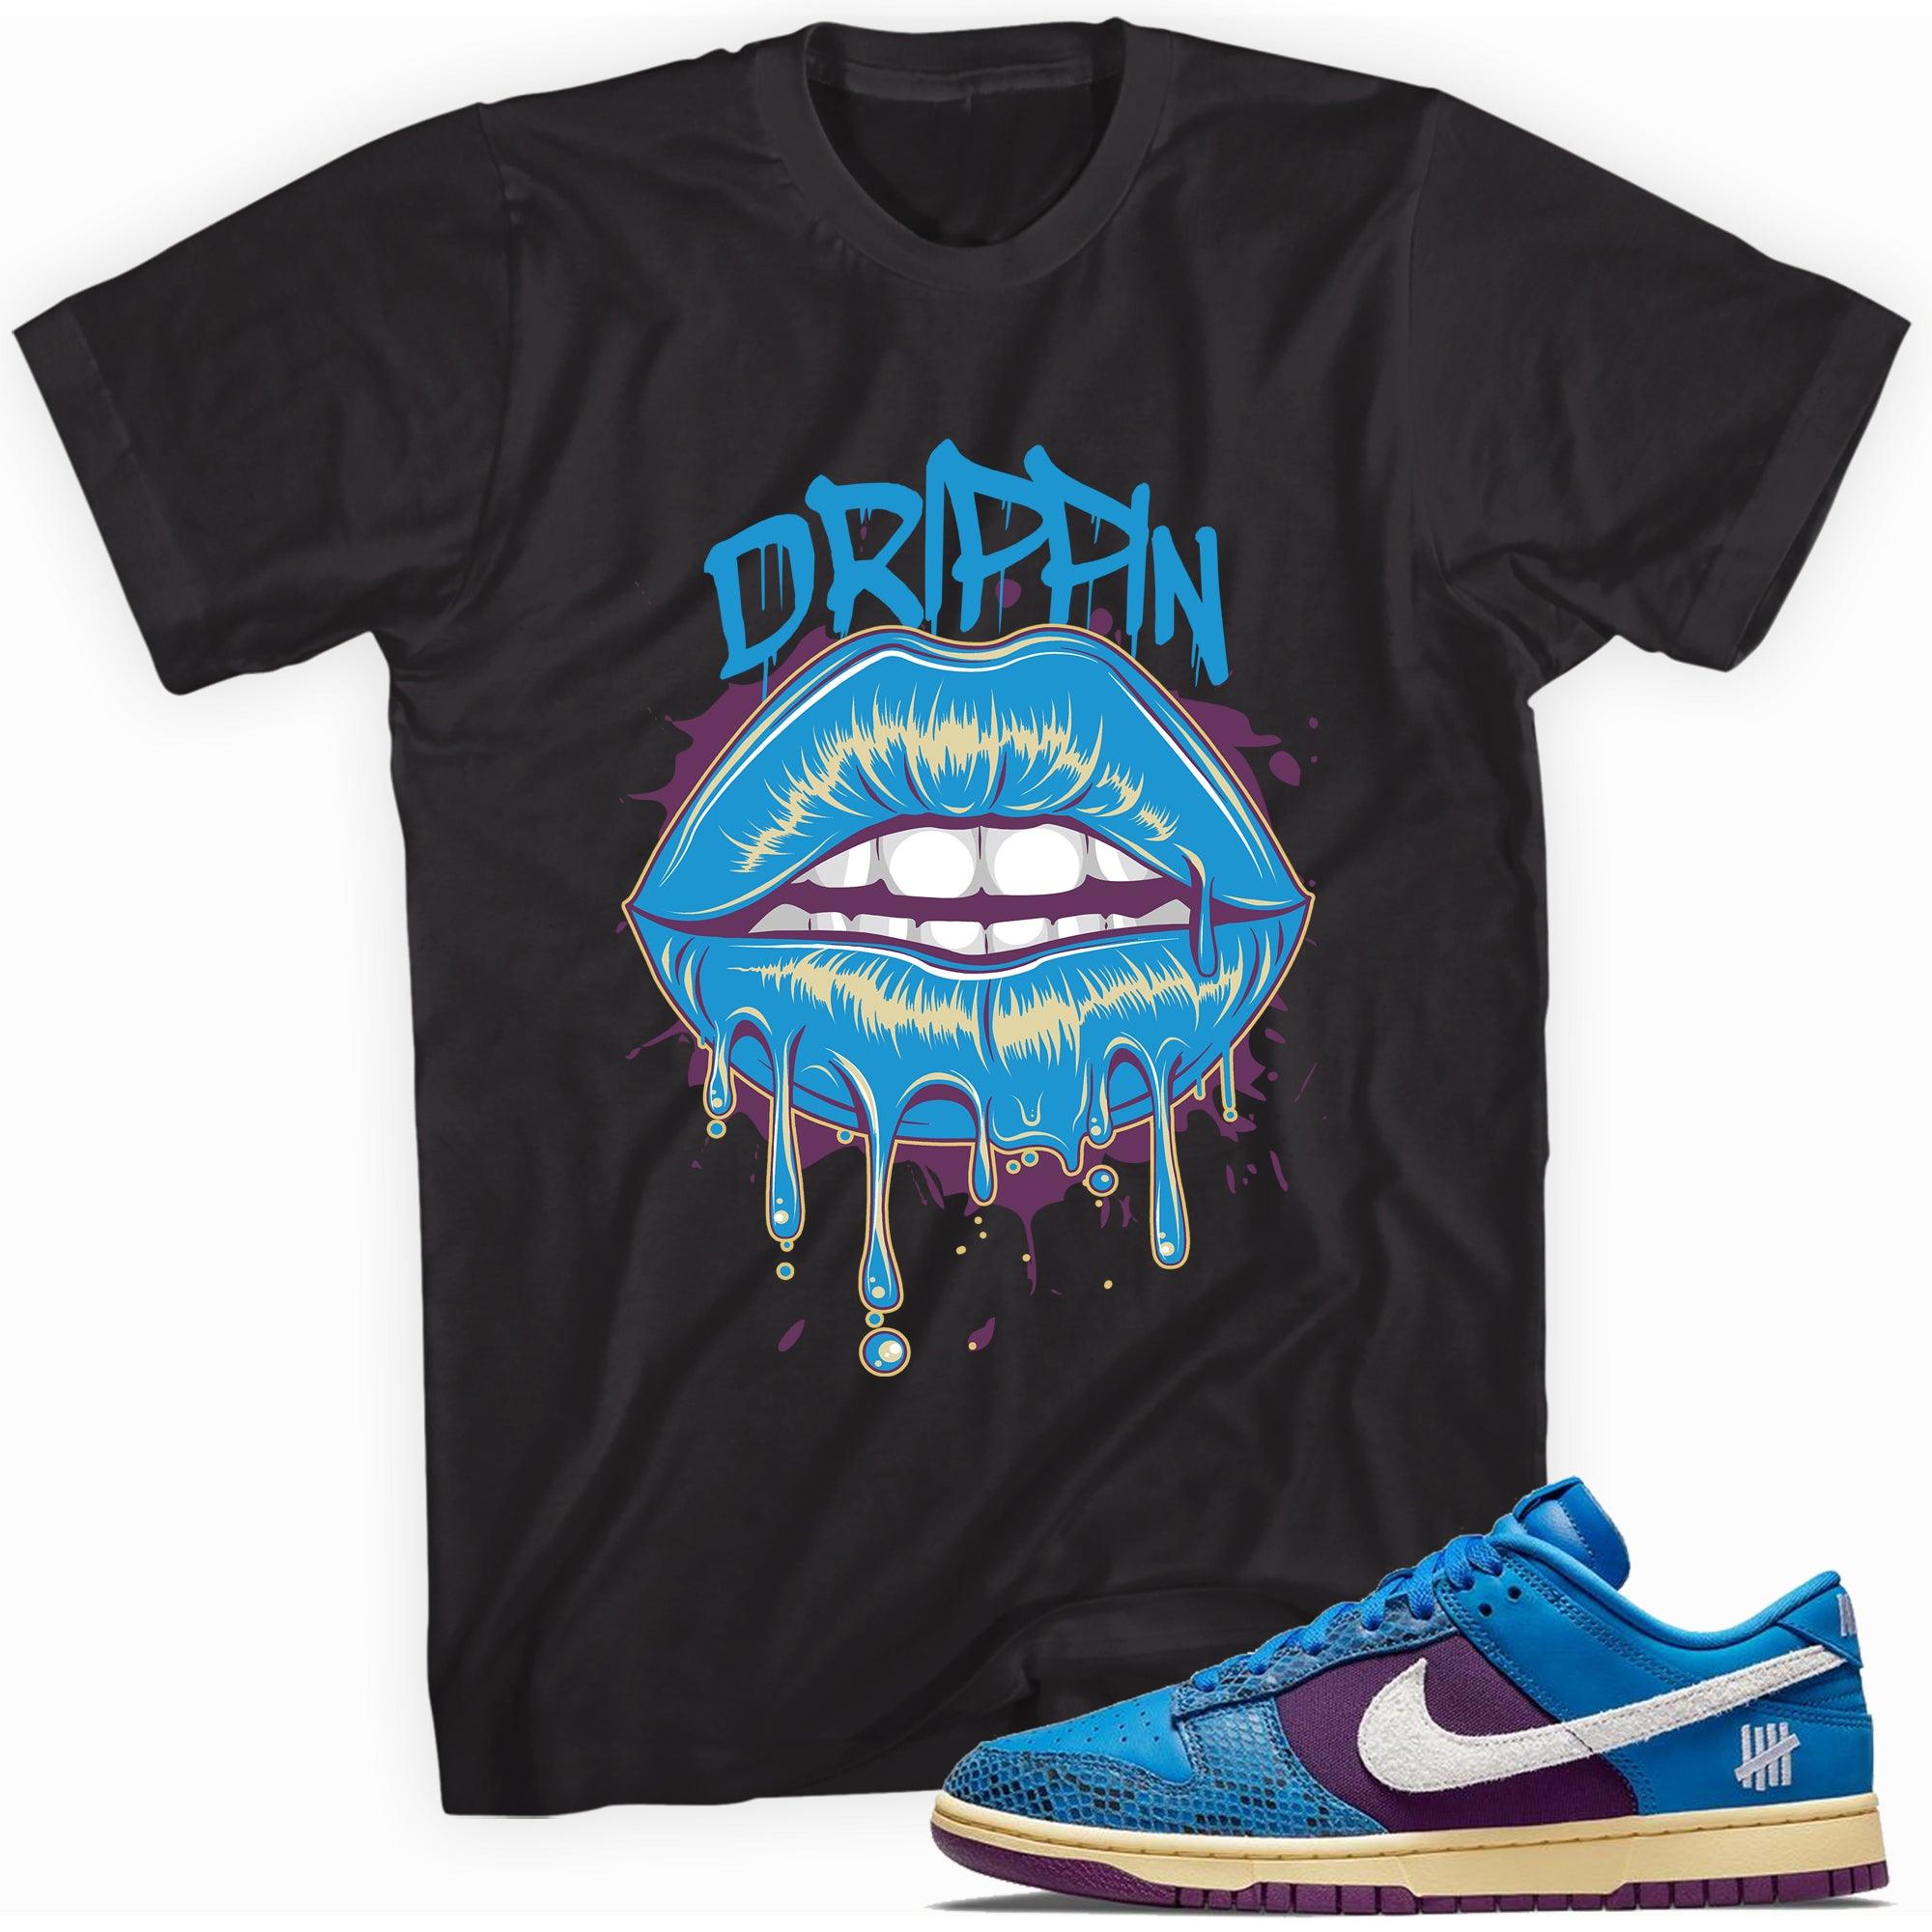 Black Drippin Lips Shirt Nike Dunks Low Undefeated 5 On It Dunk vs AF1 photo